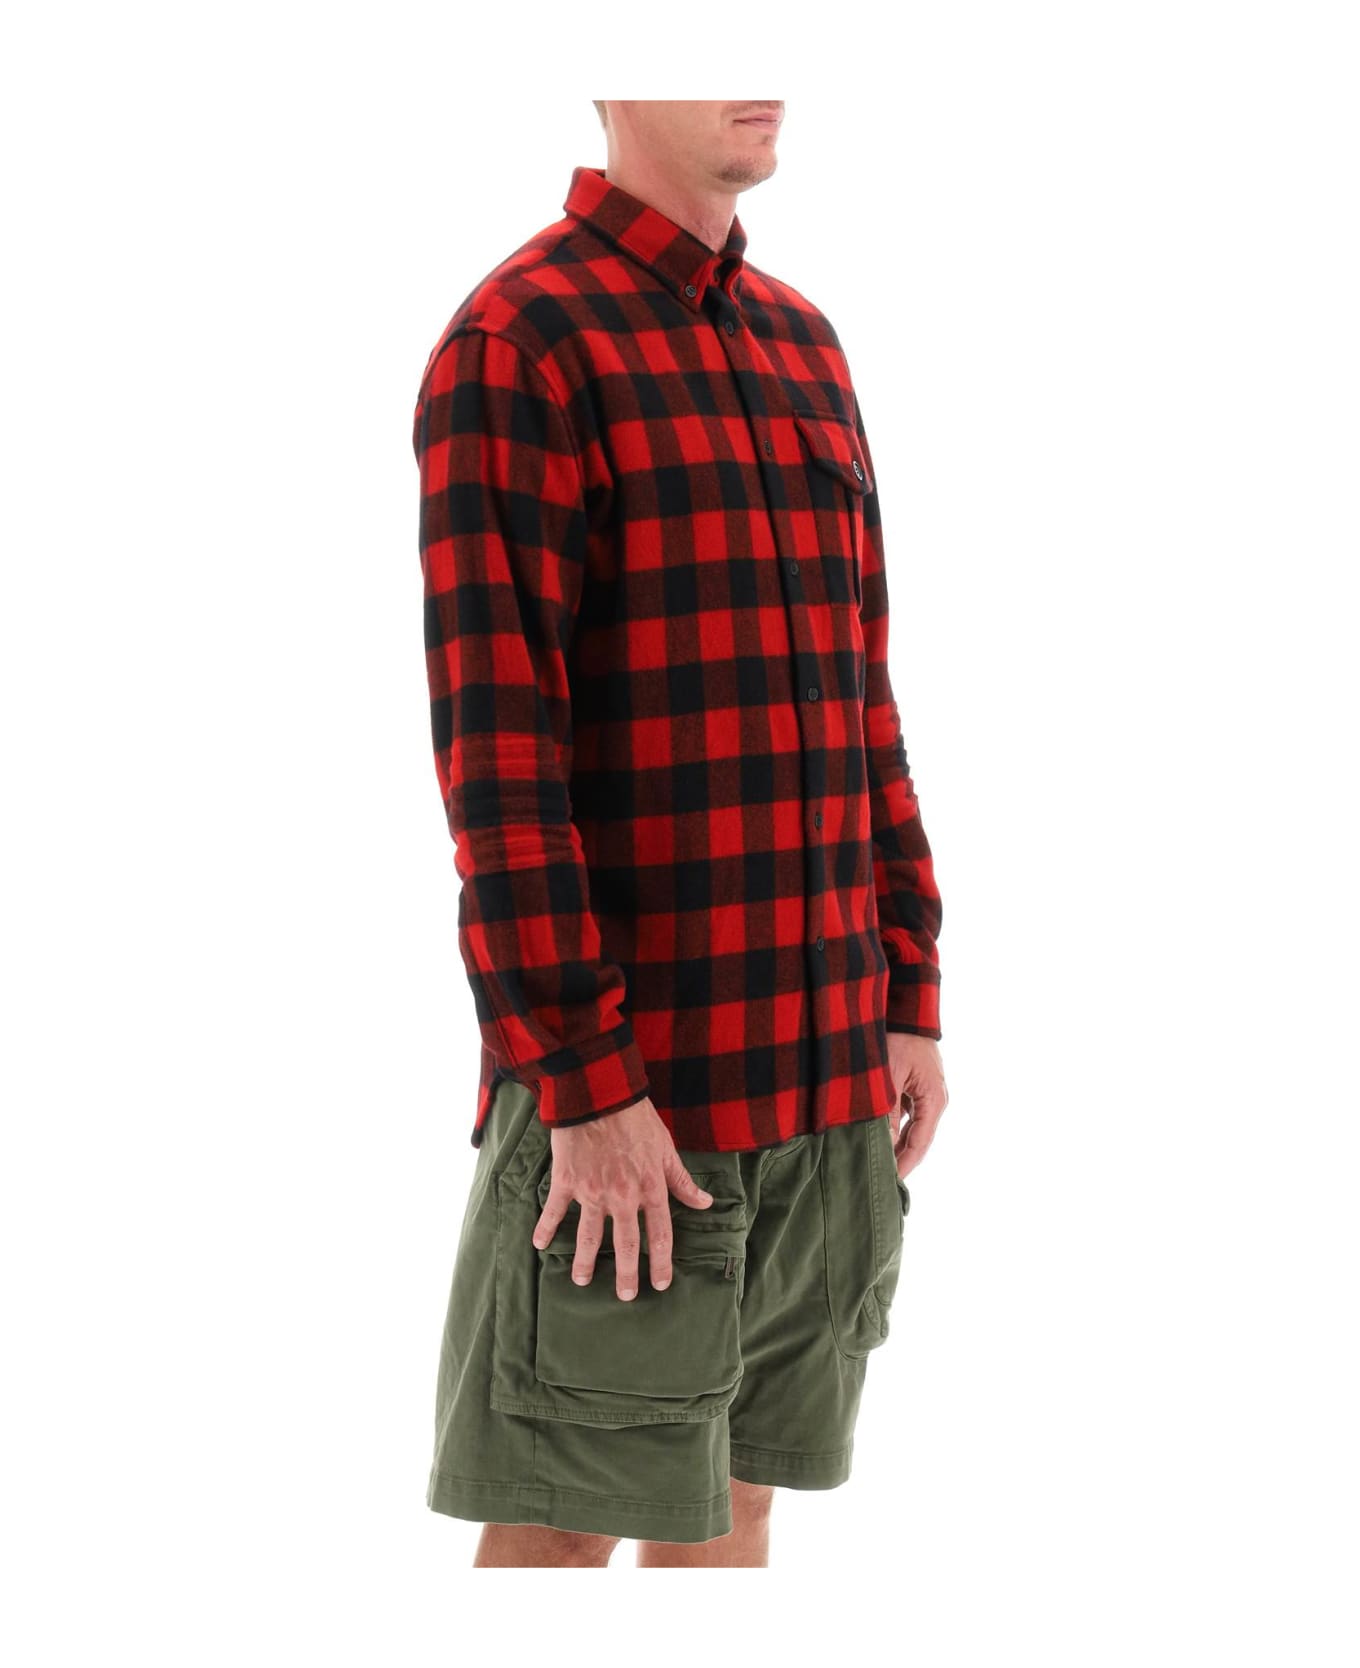 Dsquared2 Shirt With Check Motif And Back Logo - RED BLACK (Black)